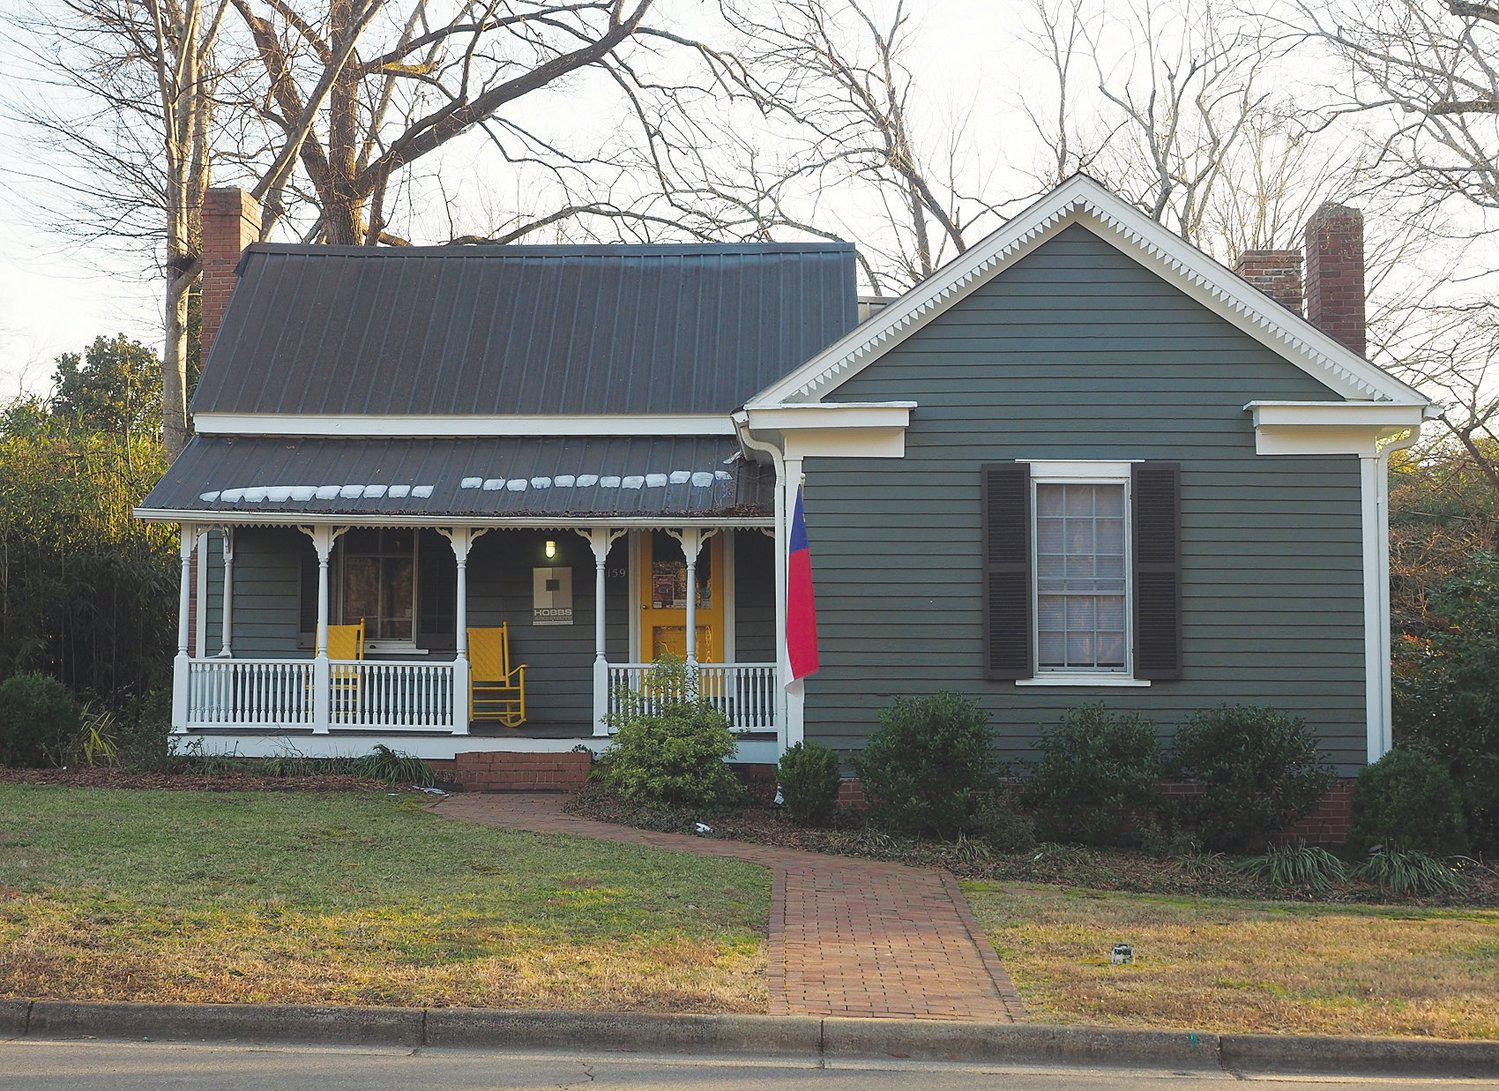 The Lewis Freeman House, now home to Hobbs Architects, is a key stop along the African-American Walking Tour in Pittsboro.